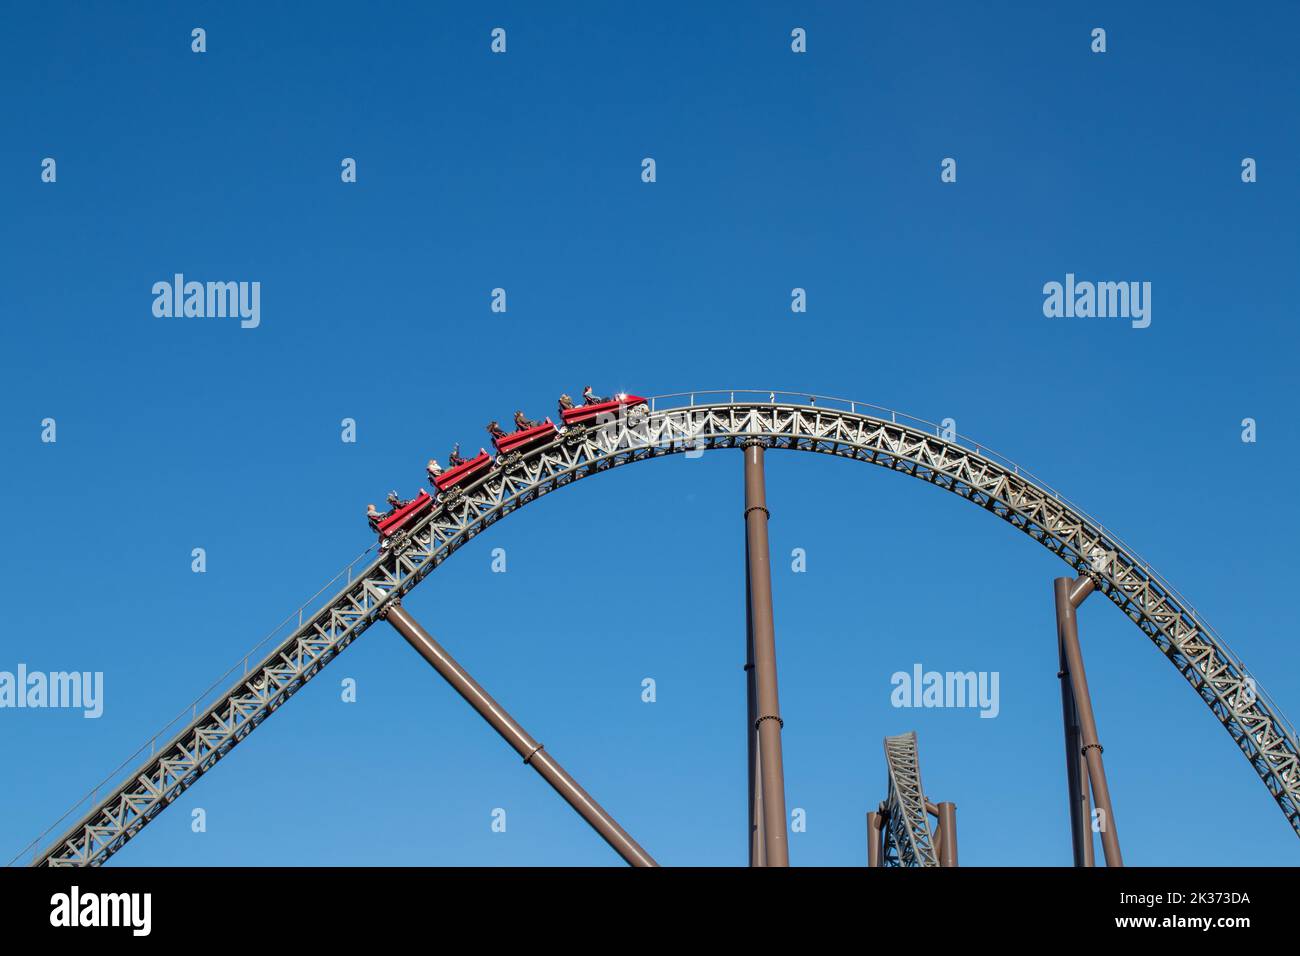 Roller coaster at the Amusement Park. Stock Photo